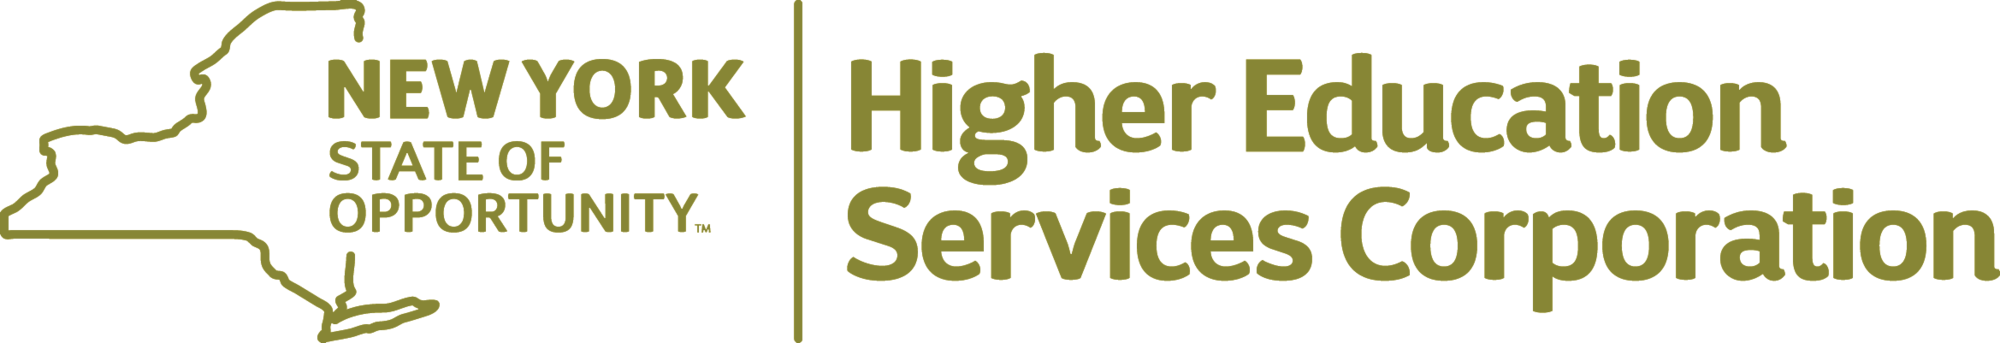 New York State Higher Education Services Corporation logo